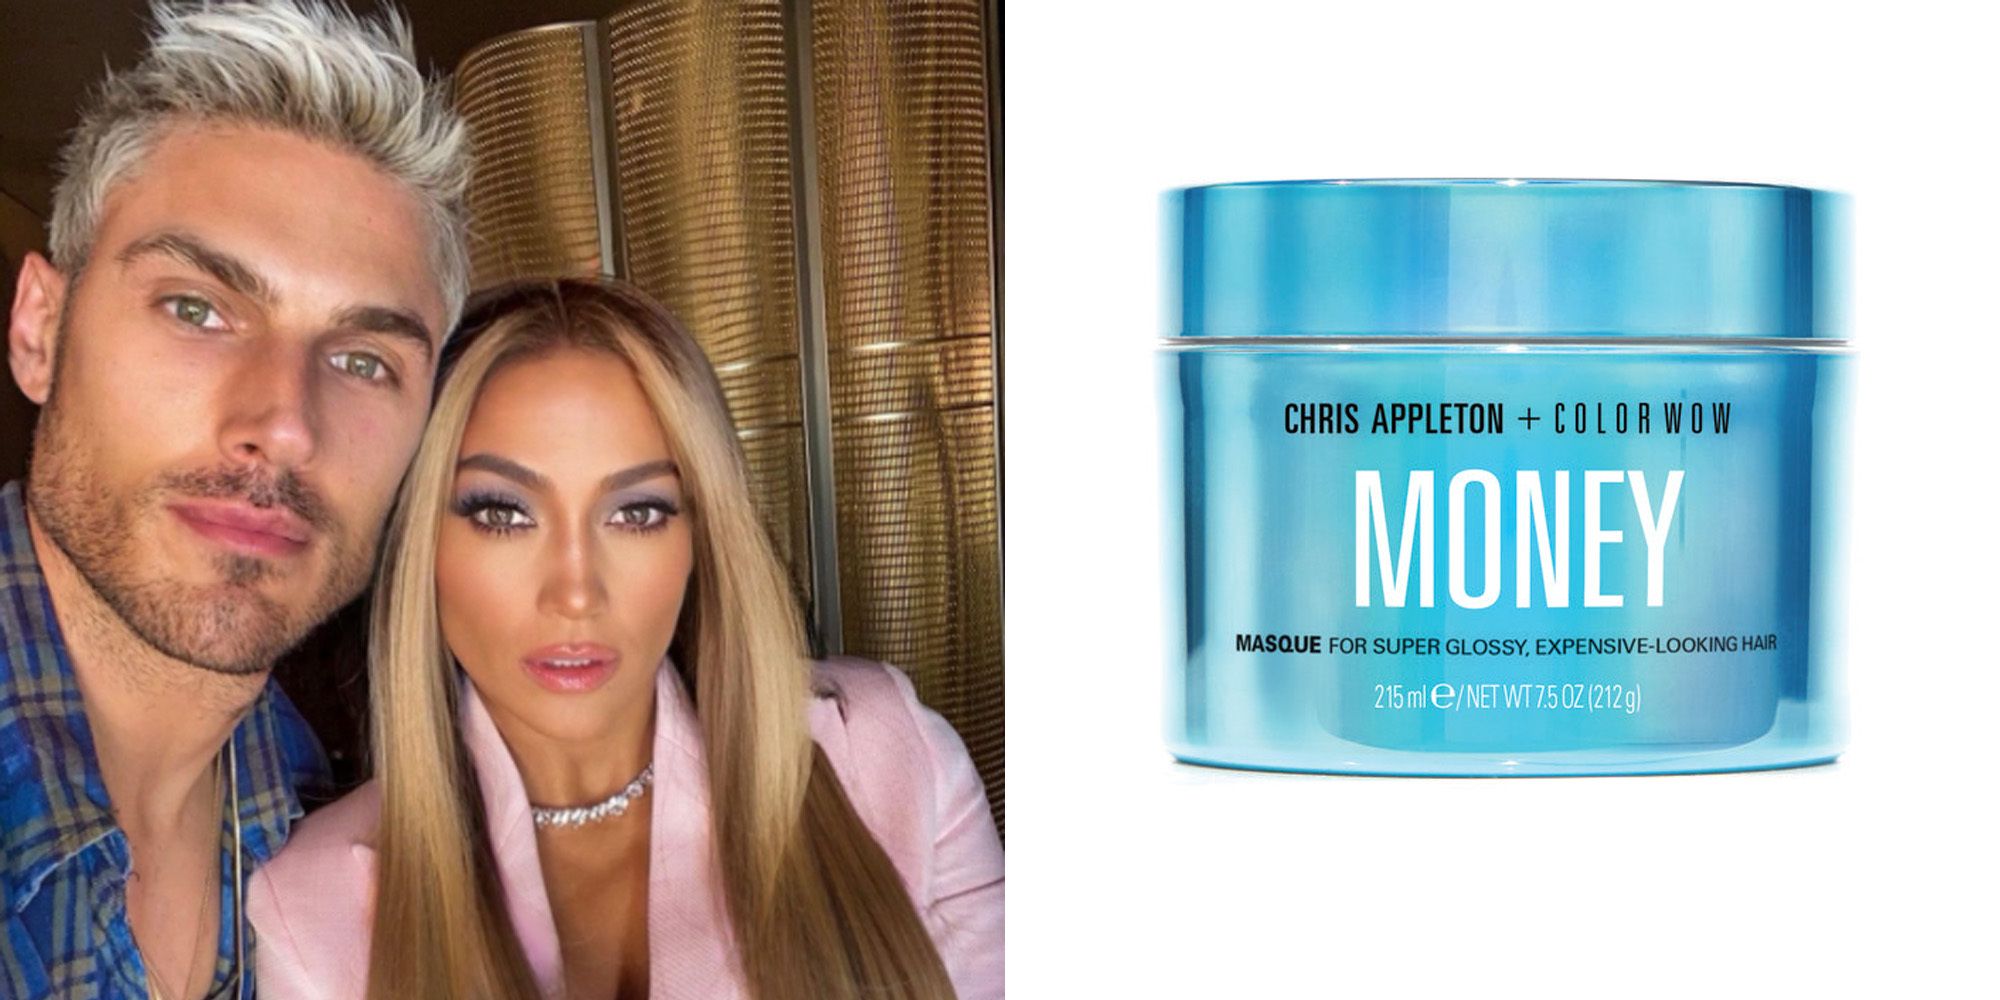 Chris Appleton Color Wow Money Masque Review - Chris Appleton Hair Products